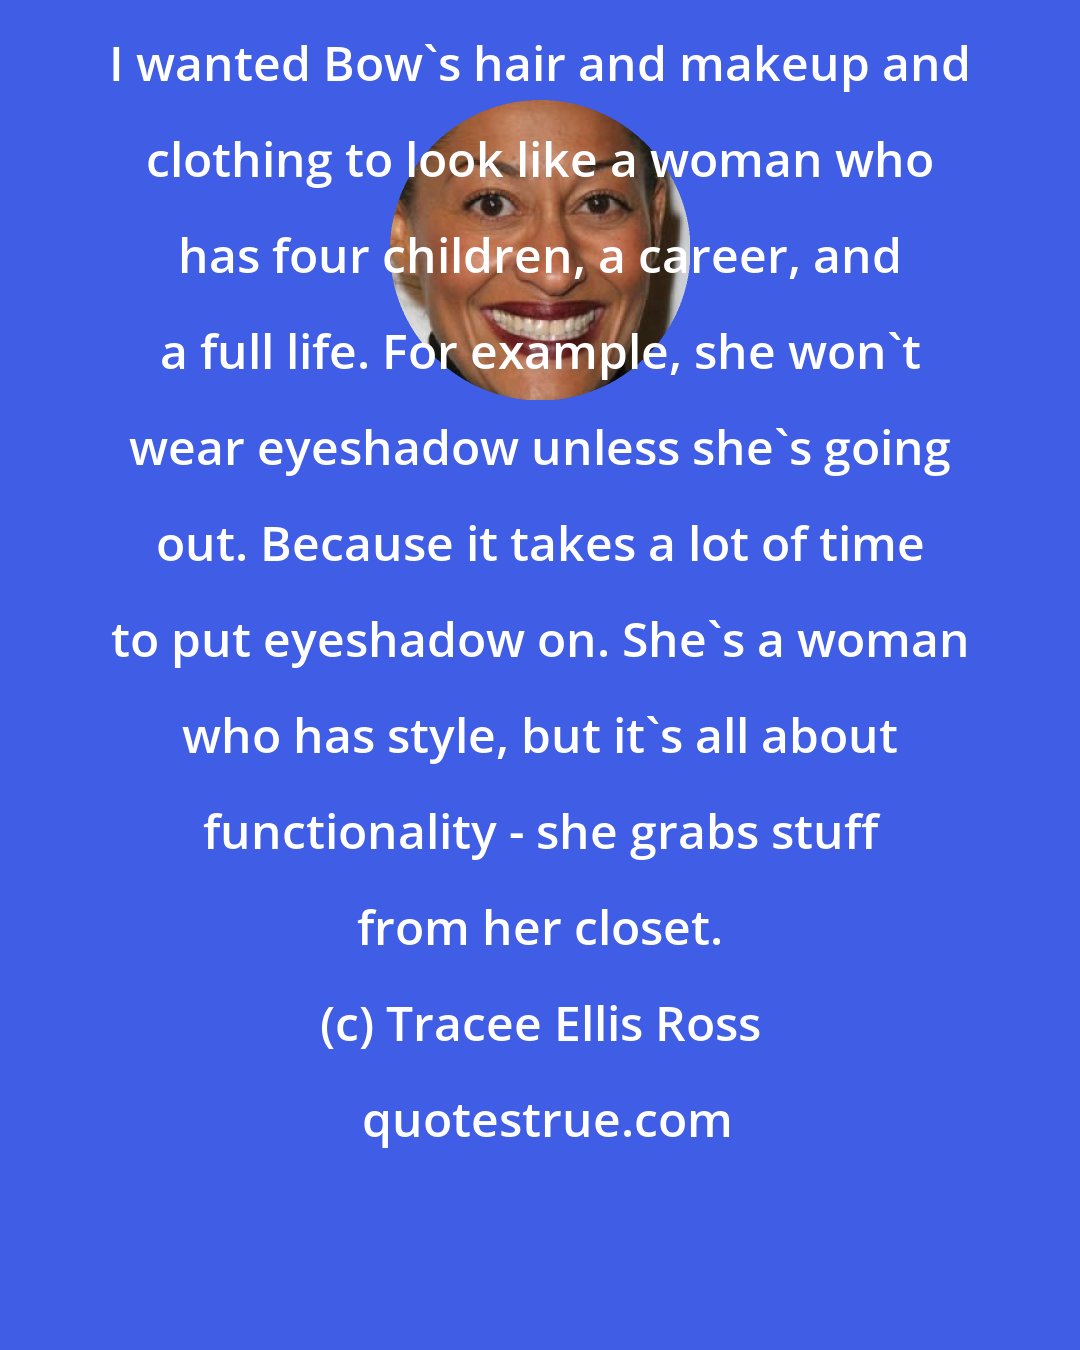 Tracee Ellis Ross: I wanted Bow's hair and makeup and clothing to look like a woman who has four children, a career, and a full life. For example, she won't wear eyeshadow unless she's going out. Because it takes a lot of time to put eyeshadow on. She's a woman who has style, but it's all about functionality - she grabs stuff from her closet.